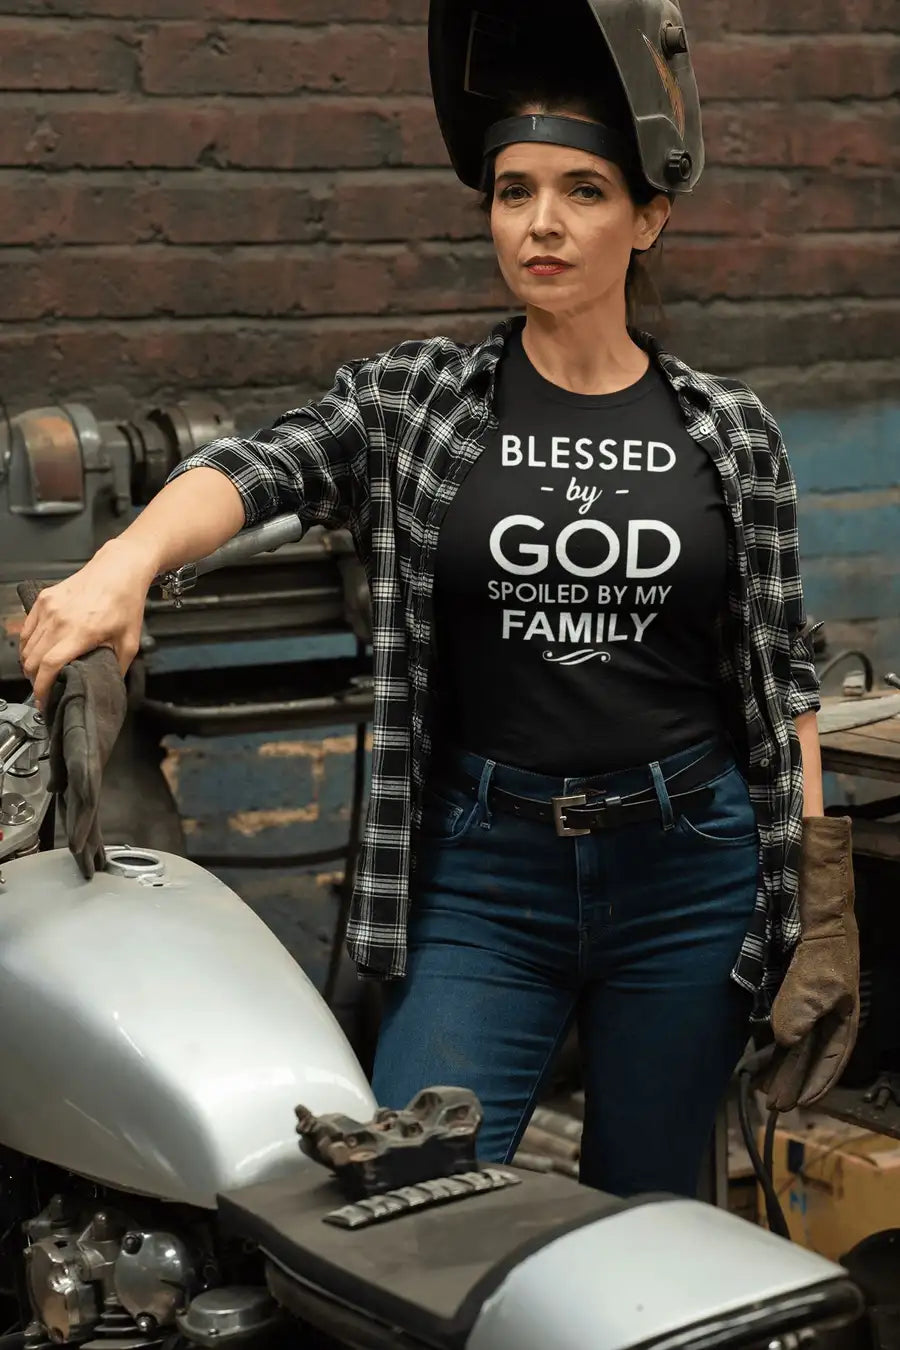 Spoiled By My Family Exclusive T Shirt for Married Men and Women | Premium Design | Catch My Drift India - Catch My Drift India  black, clothing, couples, family, female, general, god, husban